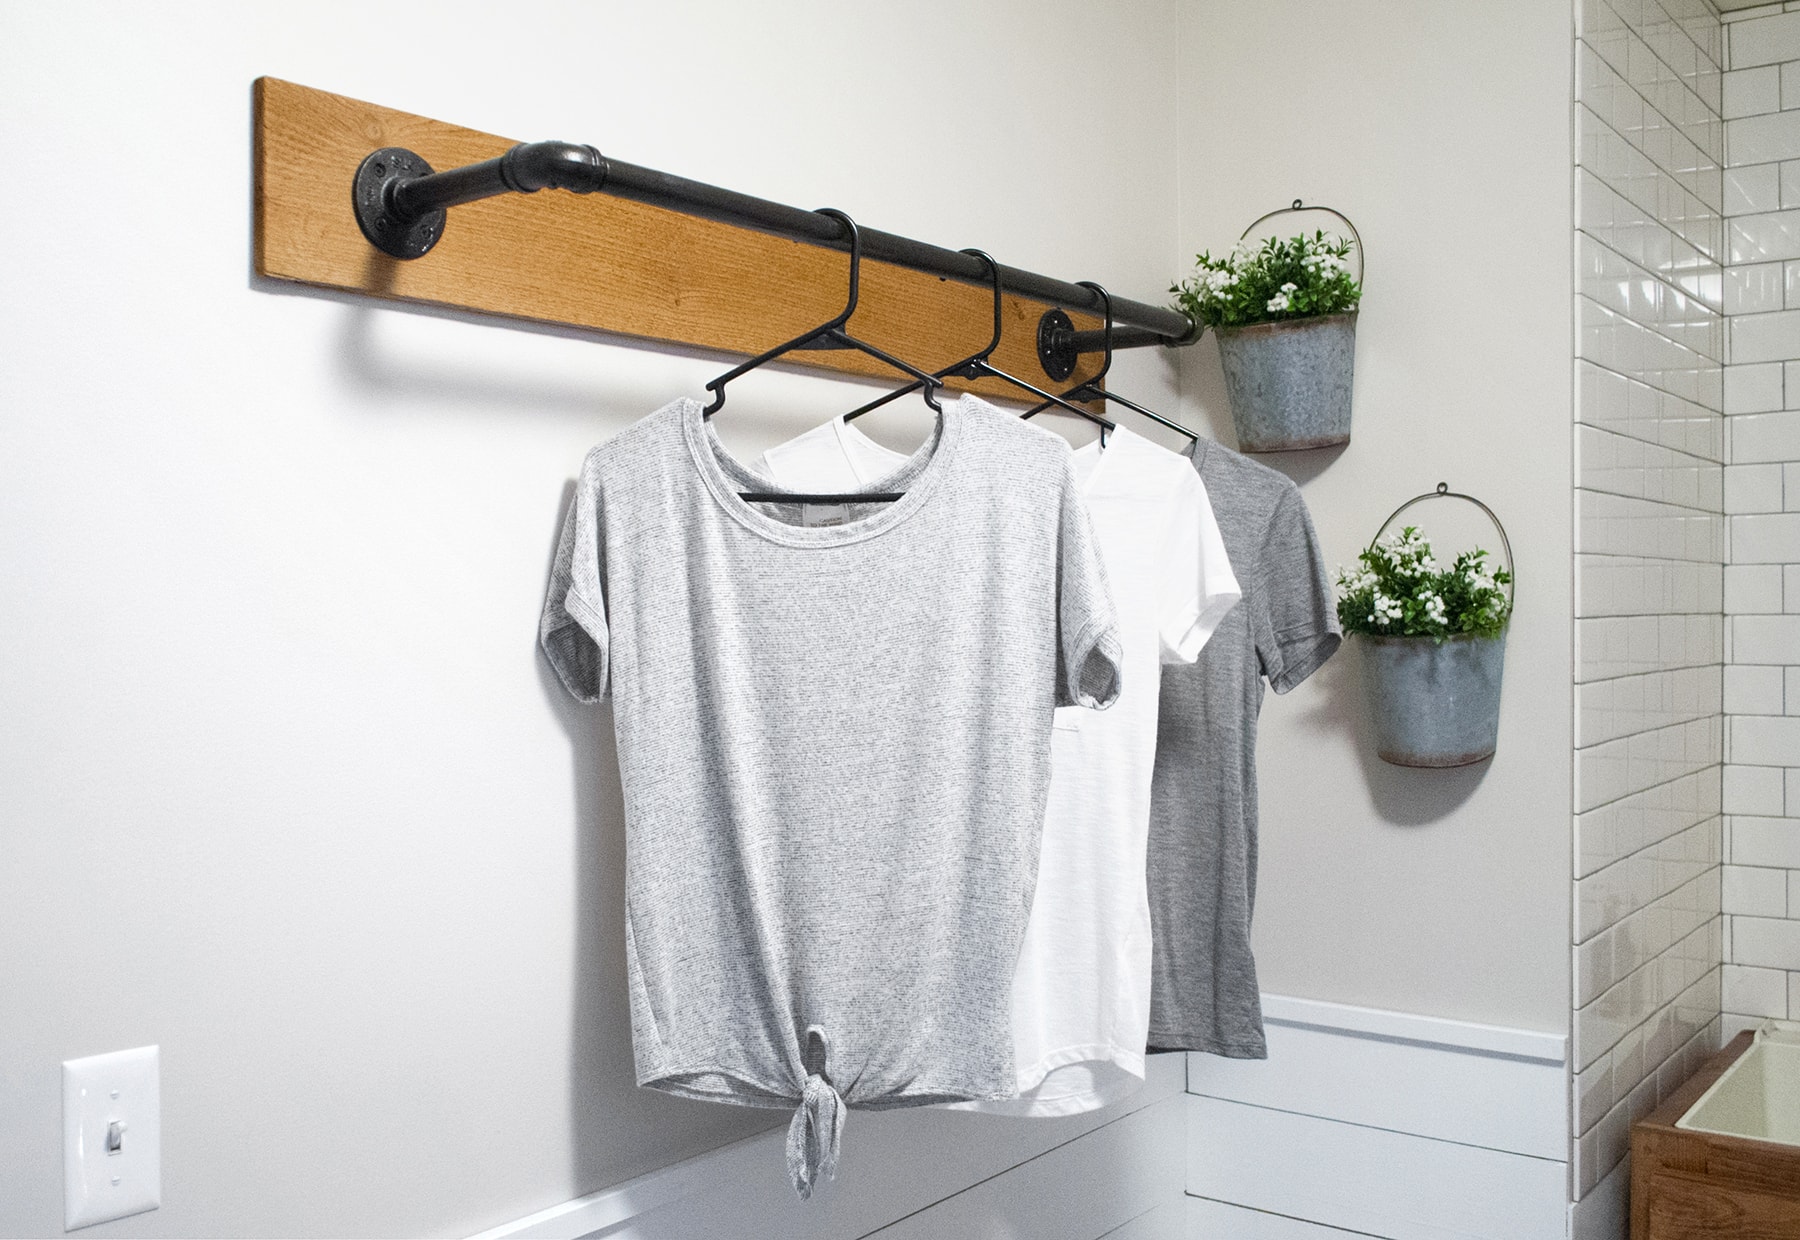 wall hangers for clothes